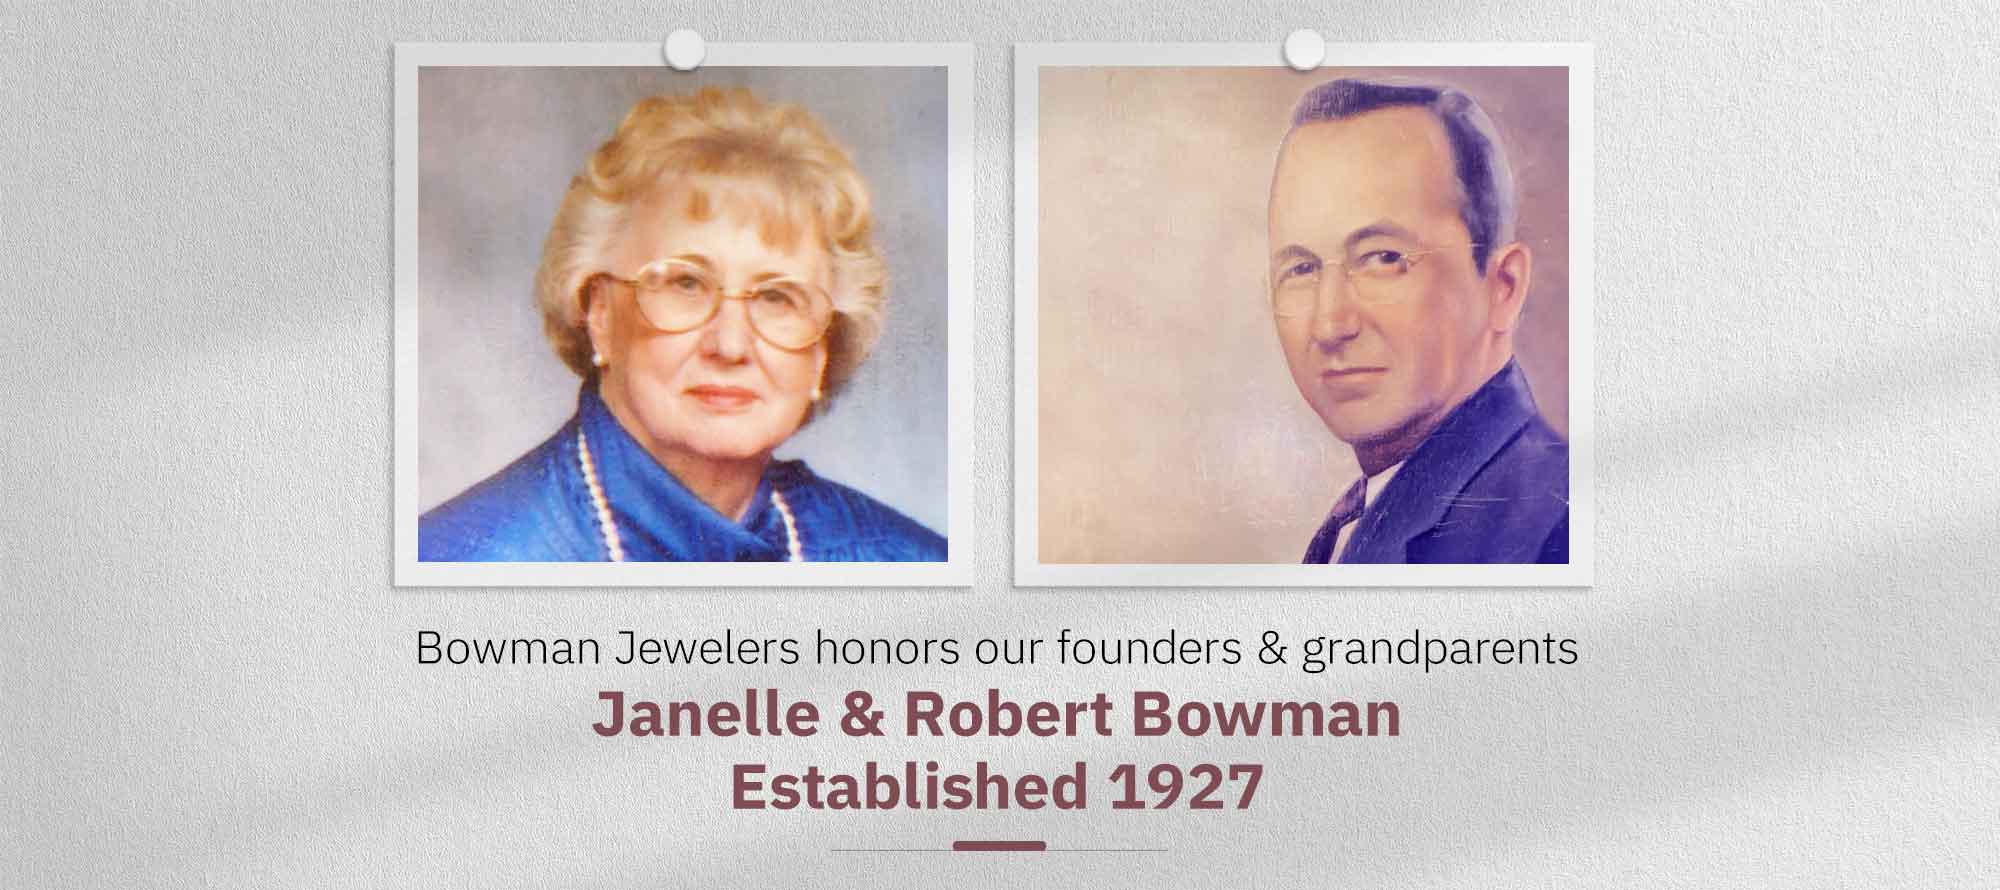 Honoring Founders of Bowman Jewelers